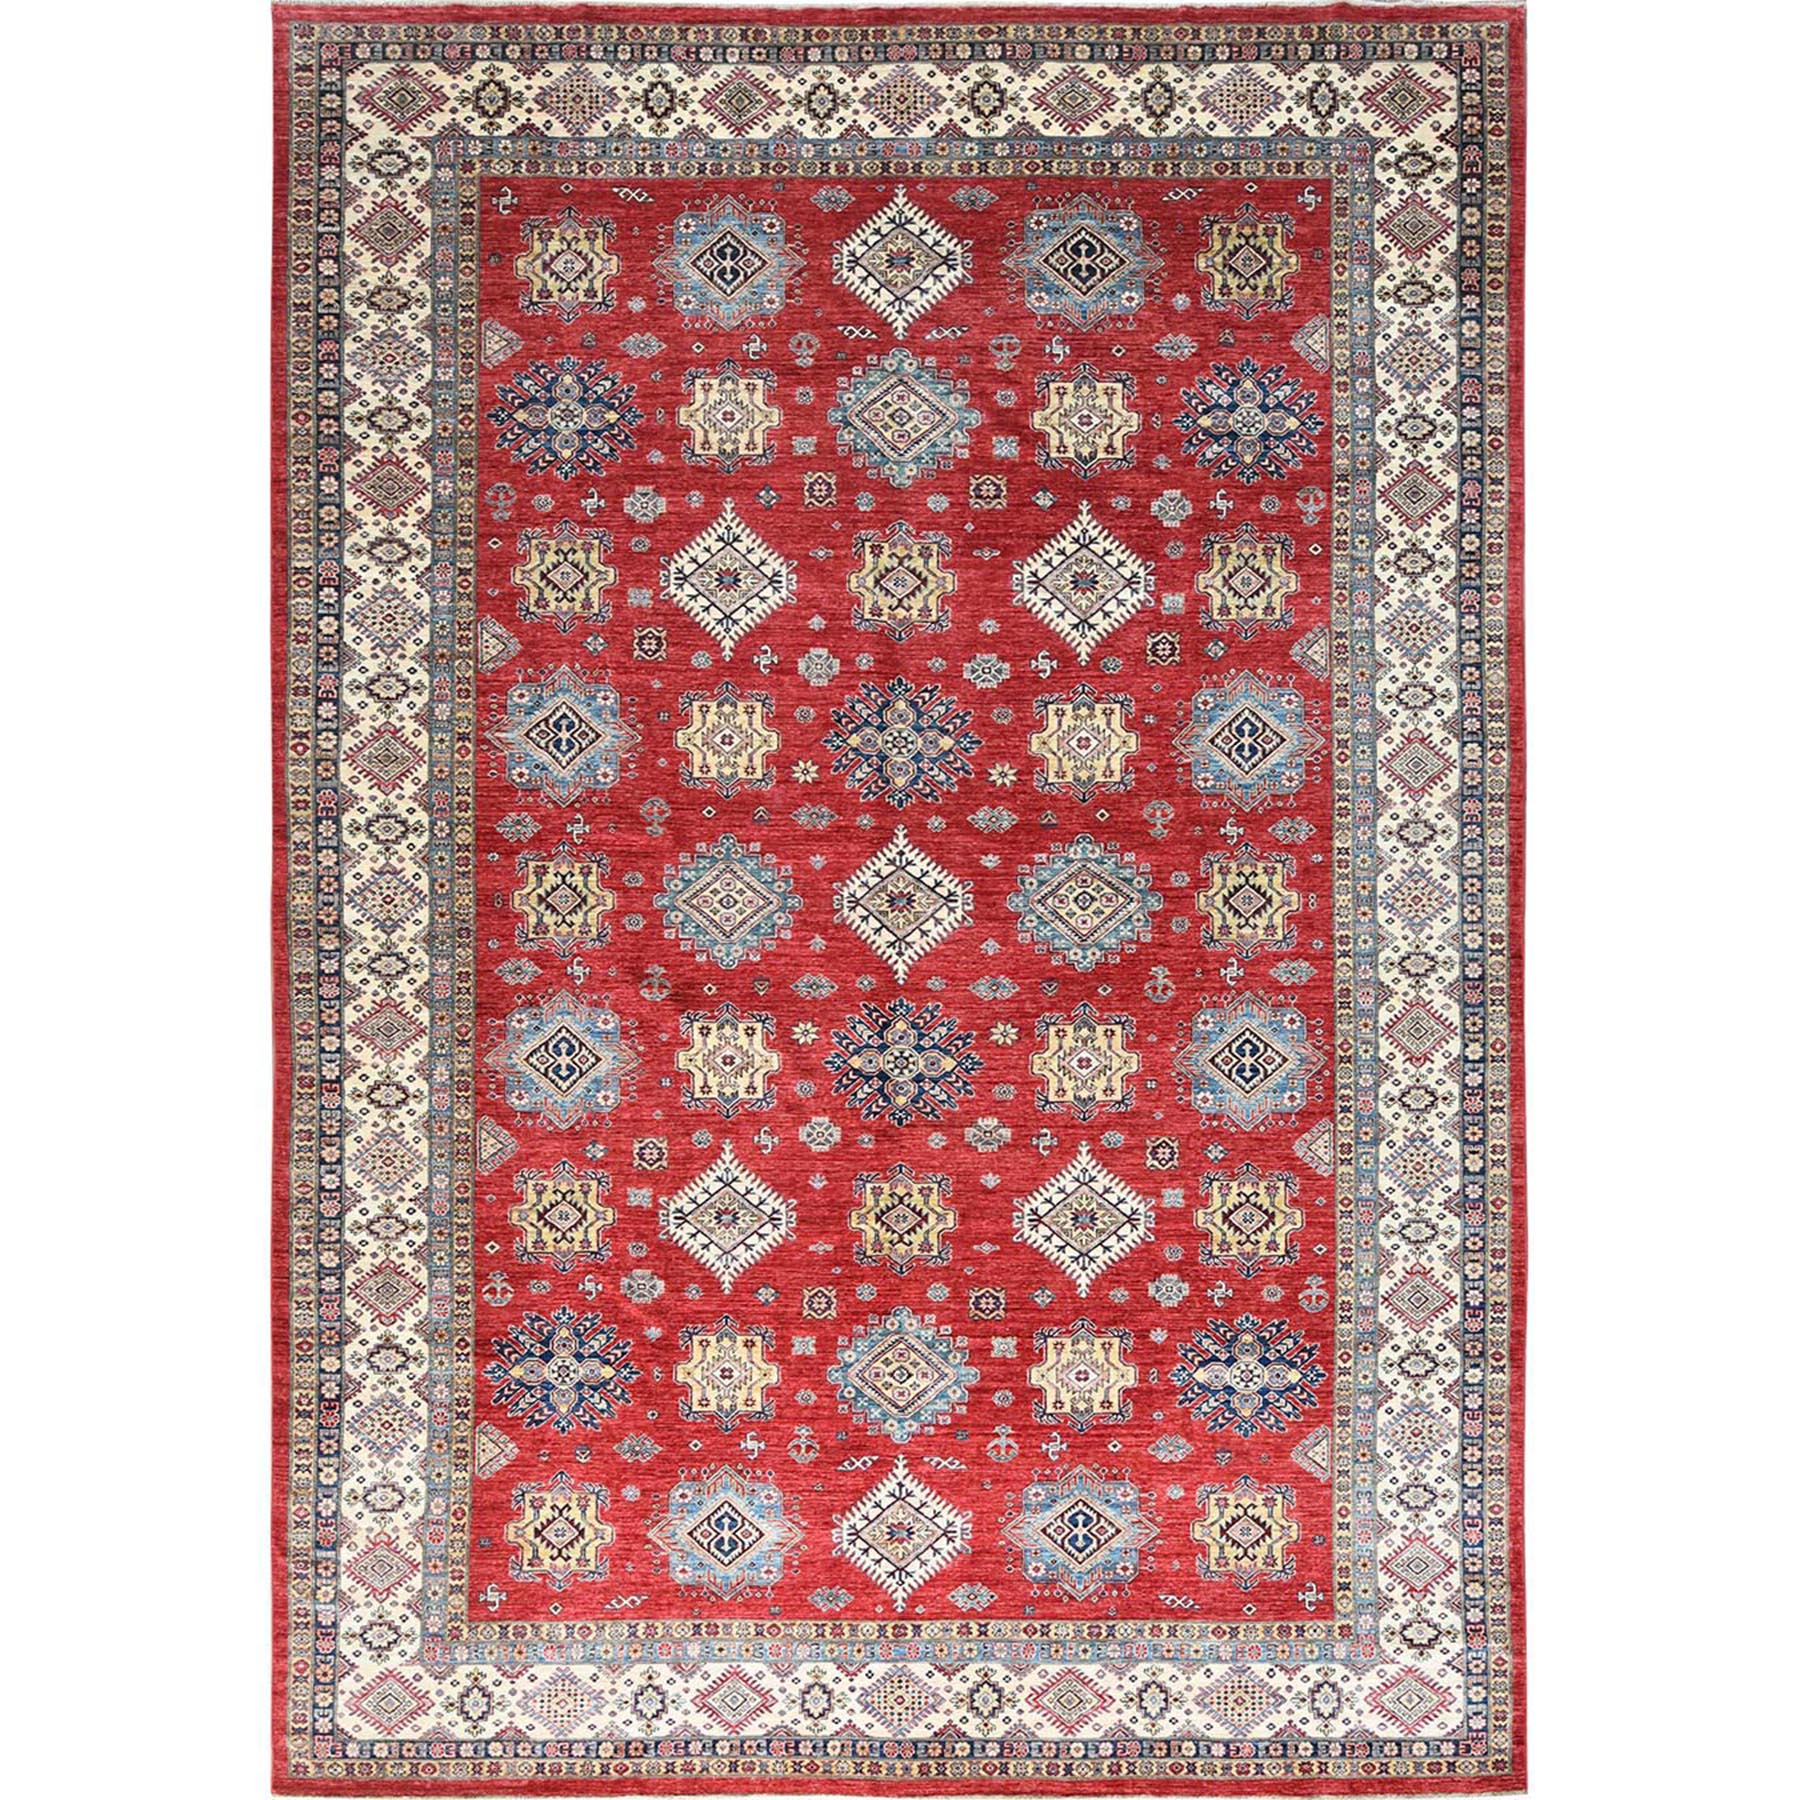  Wool Hand-Knotted Area Rug 12'1